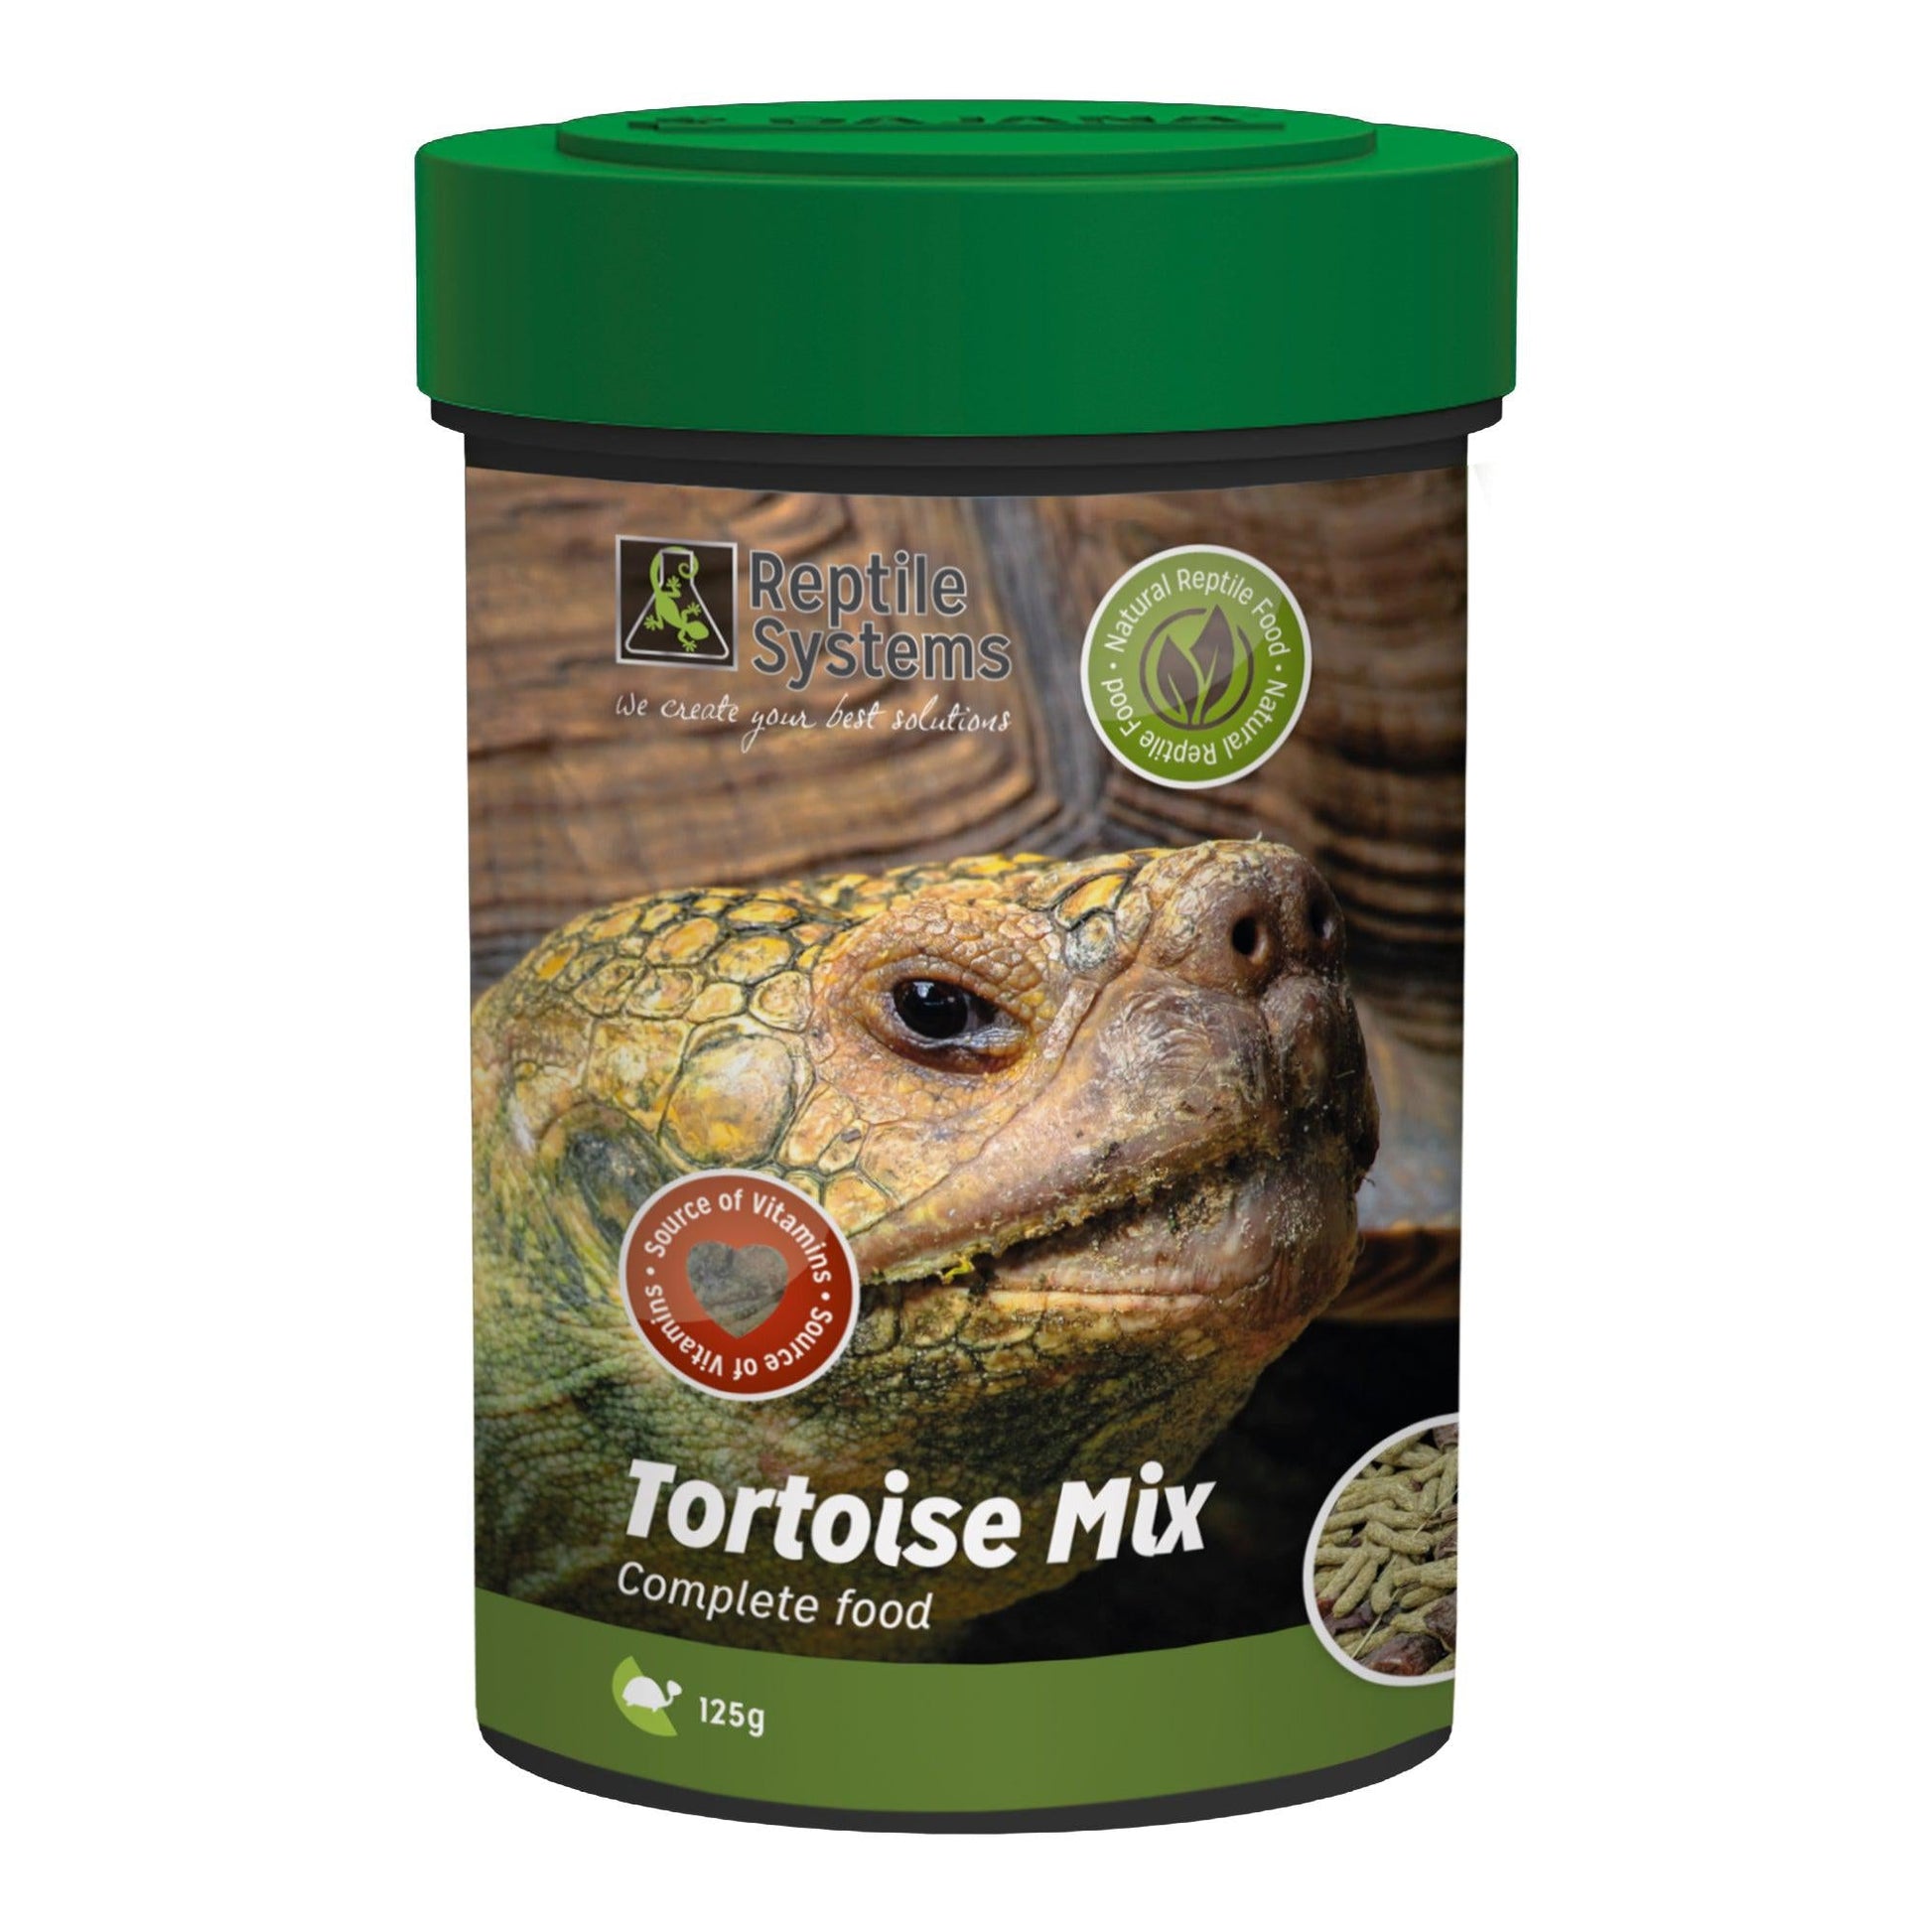 Reptile Systems Tortoise Mix, 125g